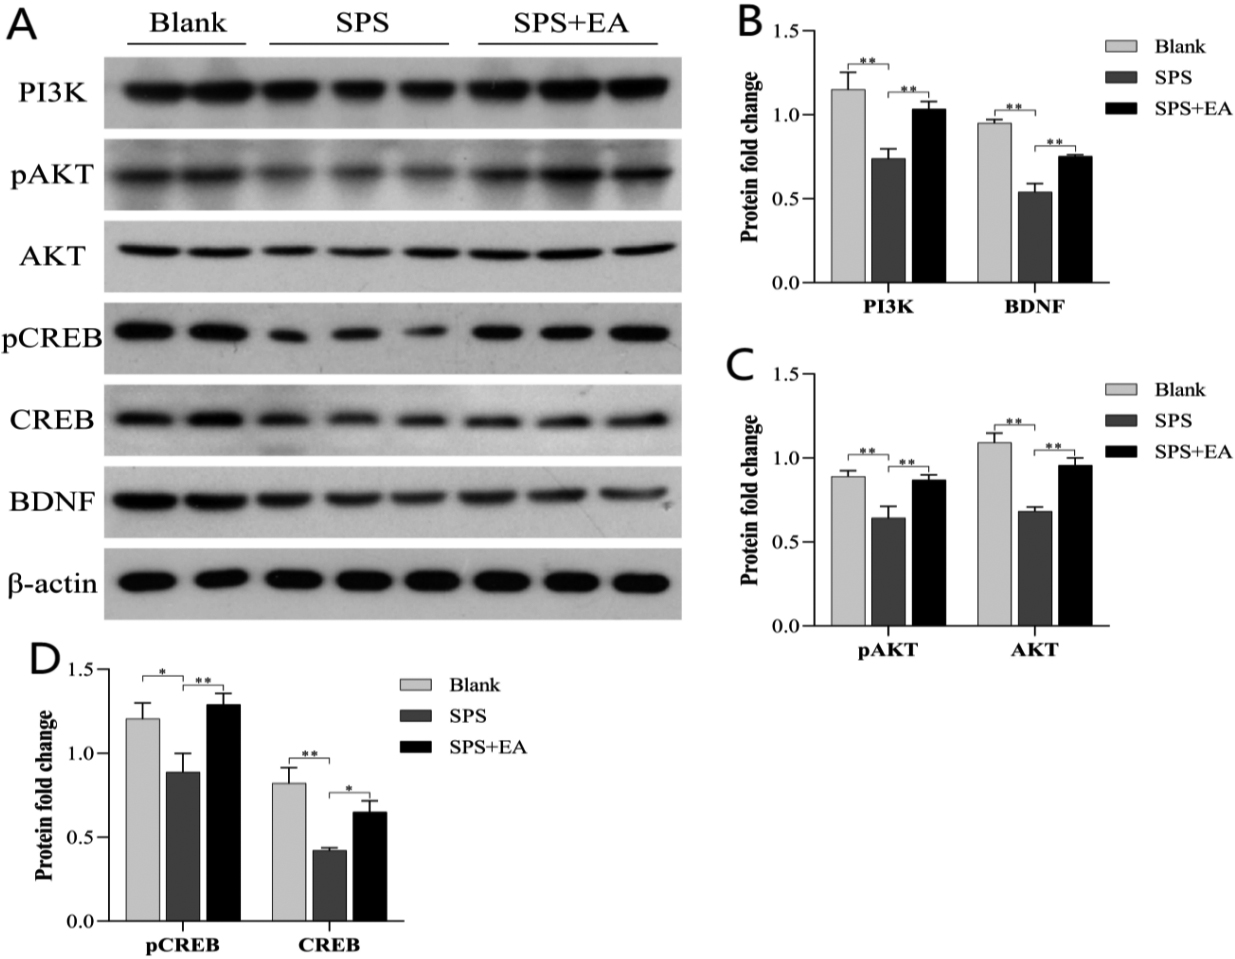 EA activates the PI3K-AKT pathway. (A) Western blotting revealed the upregulation of PI3K, AKT and CREB expression and phosphorylation of AKT and CREB in microglial cells in the SPS+EA group compared to those in the SPS group. The expression of BDNF was also upregulated. Western blot data were quantified and normalized to the β-actin level for the following: (B) total PI3K and total BDNF, (C) phospho-AKT and total AKT, and (D) phospho-CREB and total CREB levels (n= 3, p*< 0.05, p**< 0.01, p*⁣**< 0.001, compared with the SPS group). BDNF, brain-derived neurotrophic factor; CREB, cAMP response element-binding protein; PI3K, phosphatidylinositol 3-kinase.